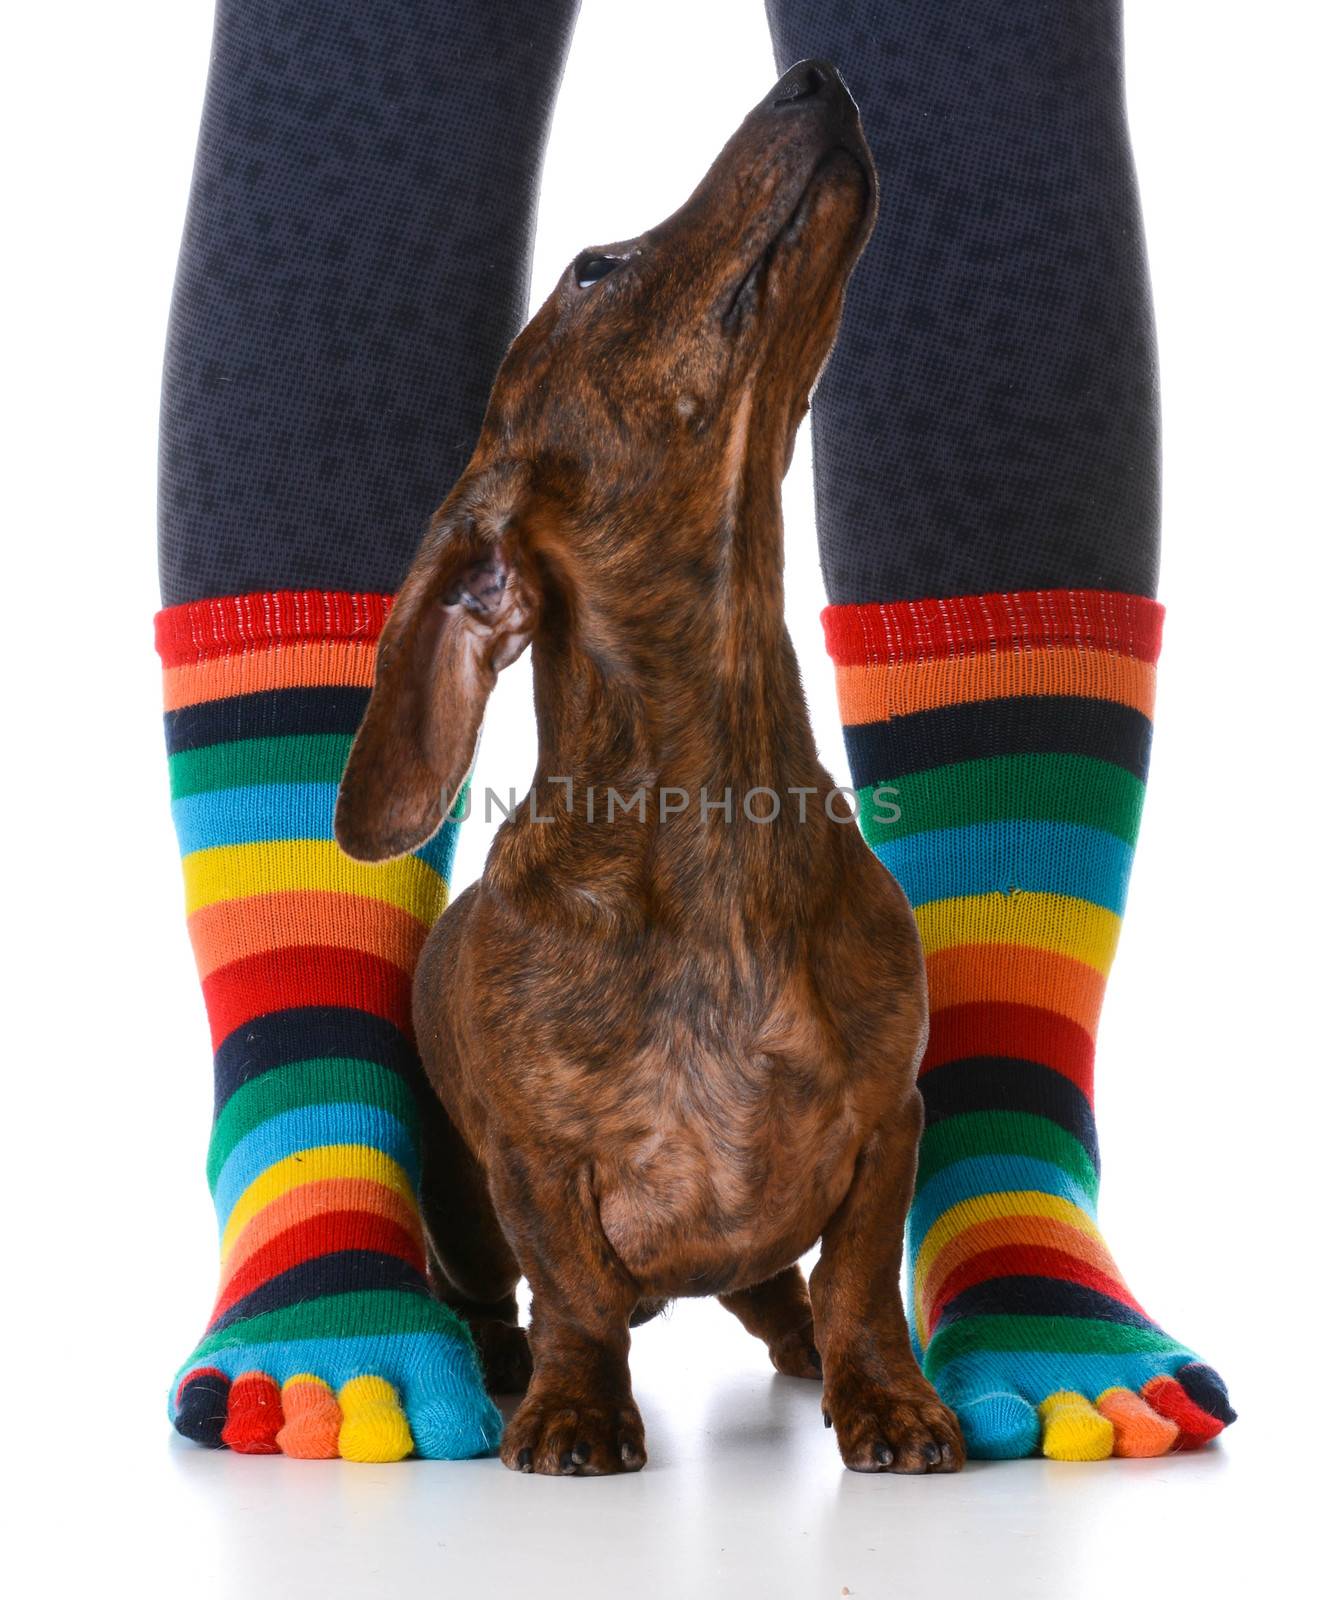 dog sitting with owner - cute dachshund puppy sitting between owners sock feet on white background